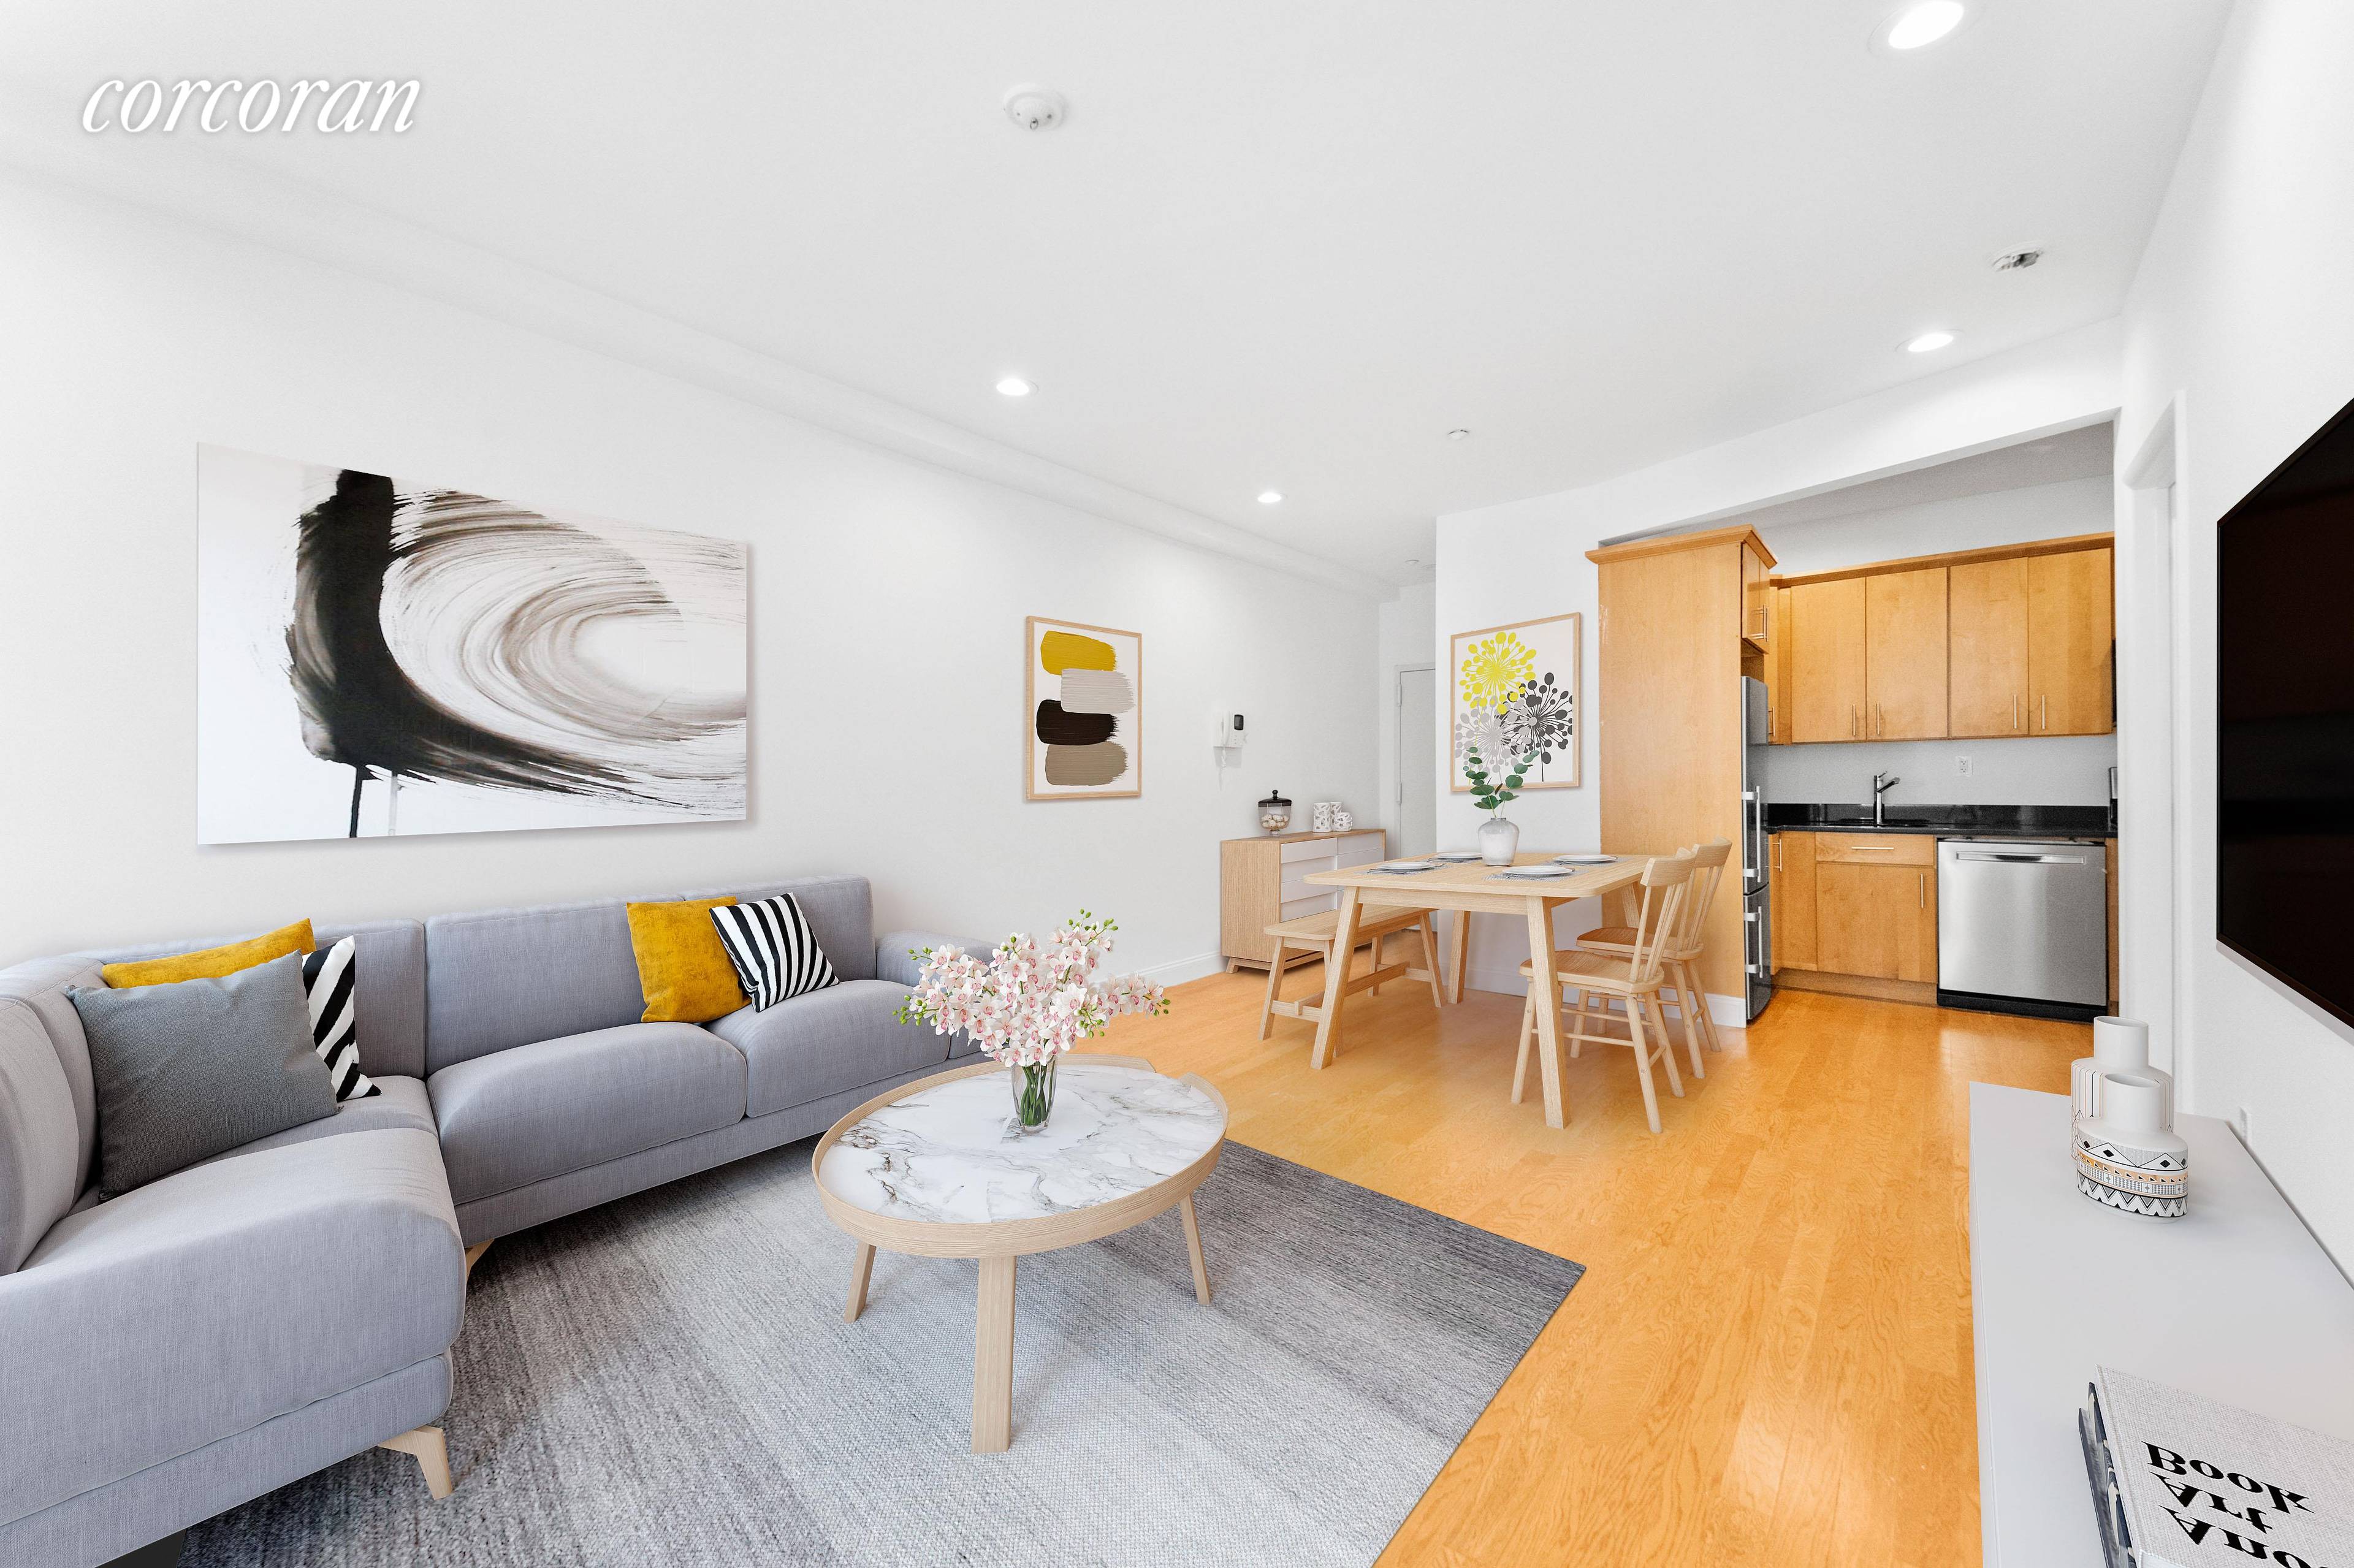 In the very heart of Clinton Hill lies a fabulous 1 bedroom home waiting for a new owner to fall in love with.